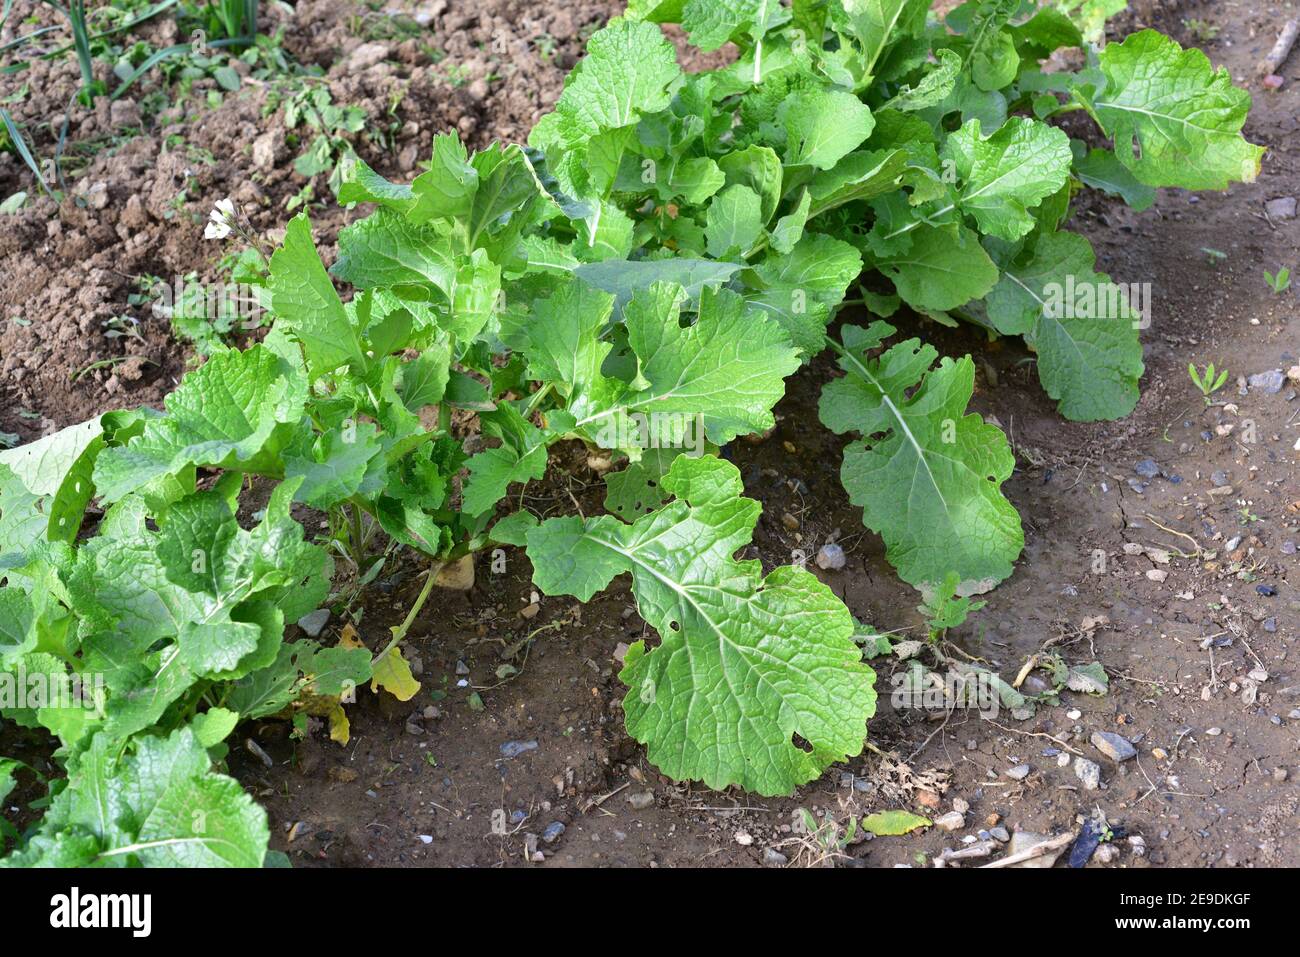 Turnip (Brassica rapa rapa) is an annual plant of edible root. This photo was taken in Baix Llobregat; Barcelona province, Catalonia, Spain. Stock Photo